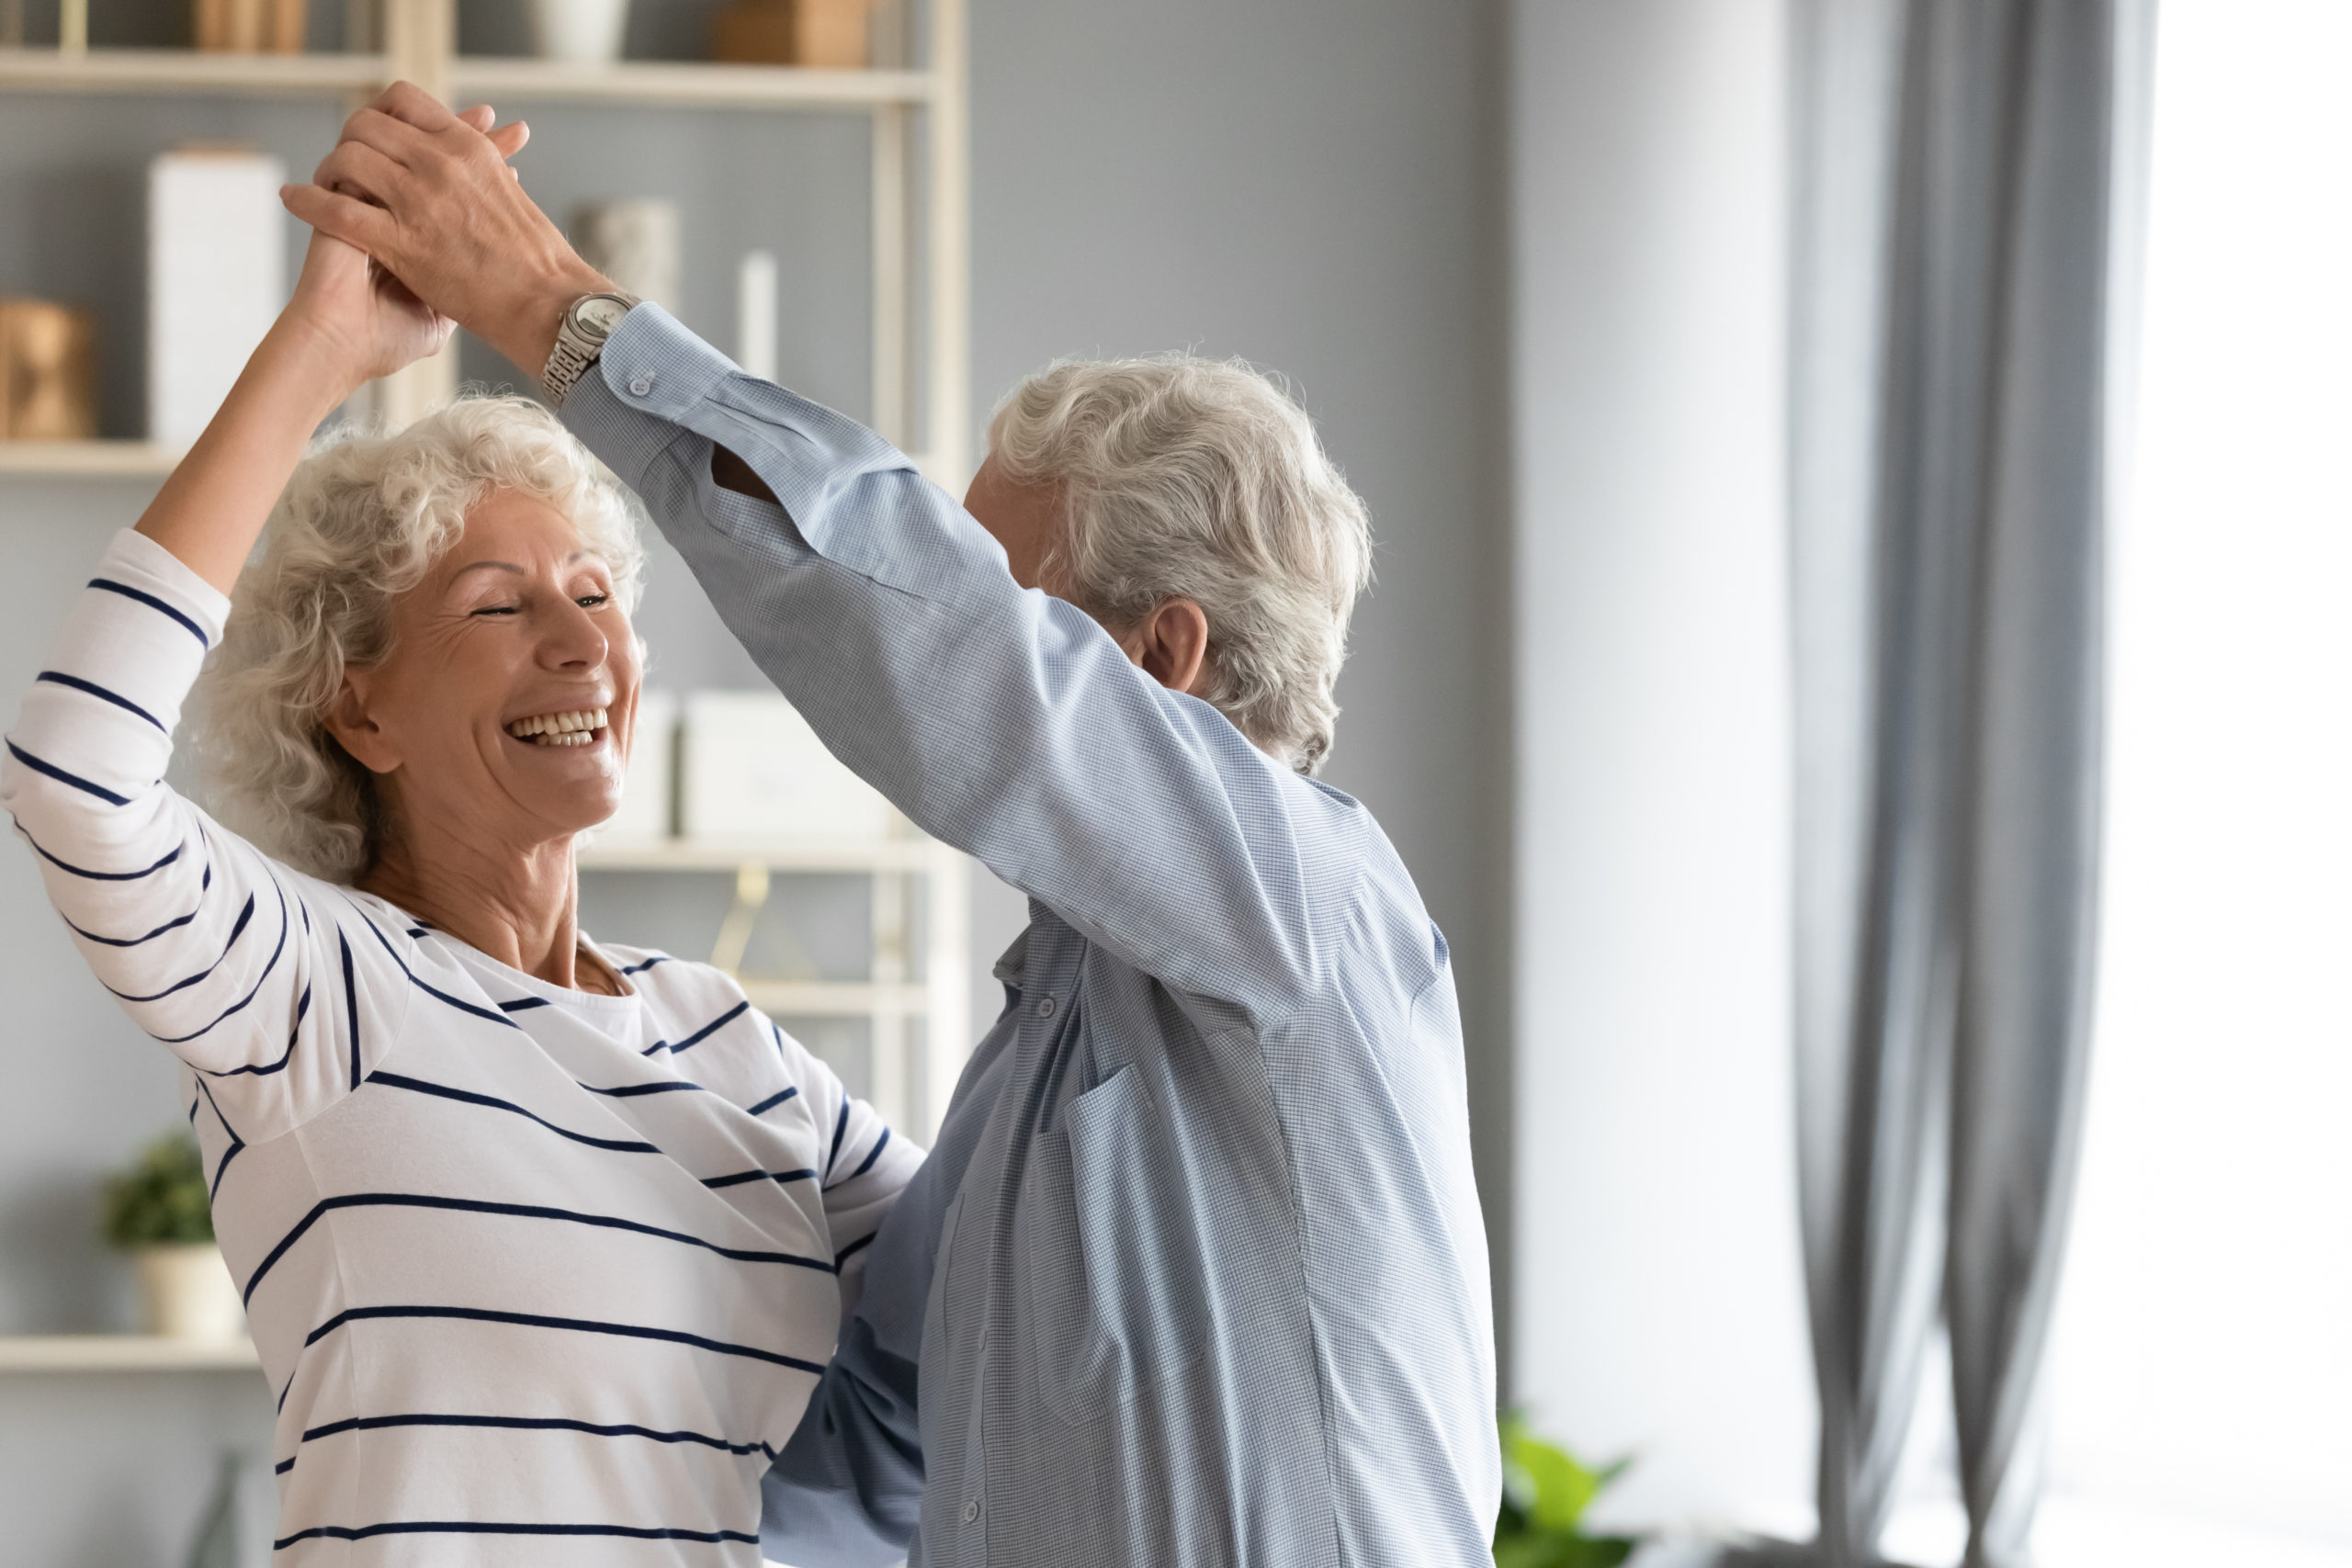 Overjoyed elderly 60s couple spouse dance swirl in living room together, happy smiling mature retired husband and wife have fun engaged in funny activity, feel optimistic active enjoy weekend together